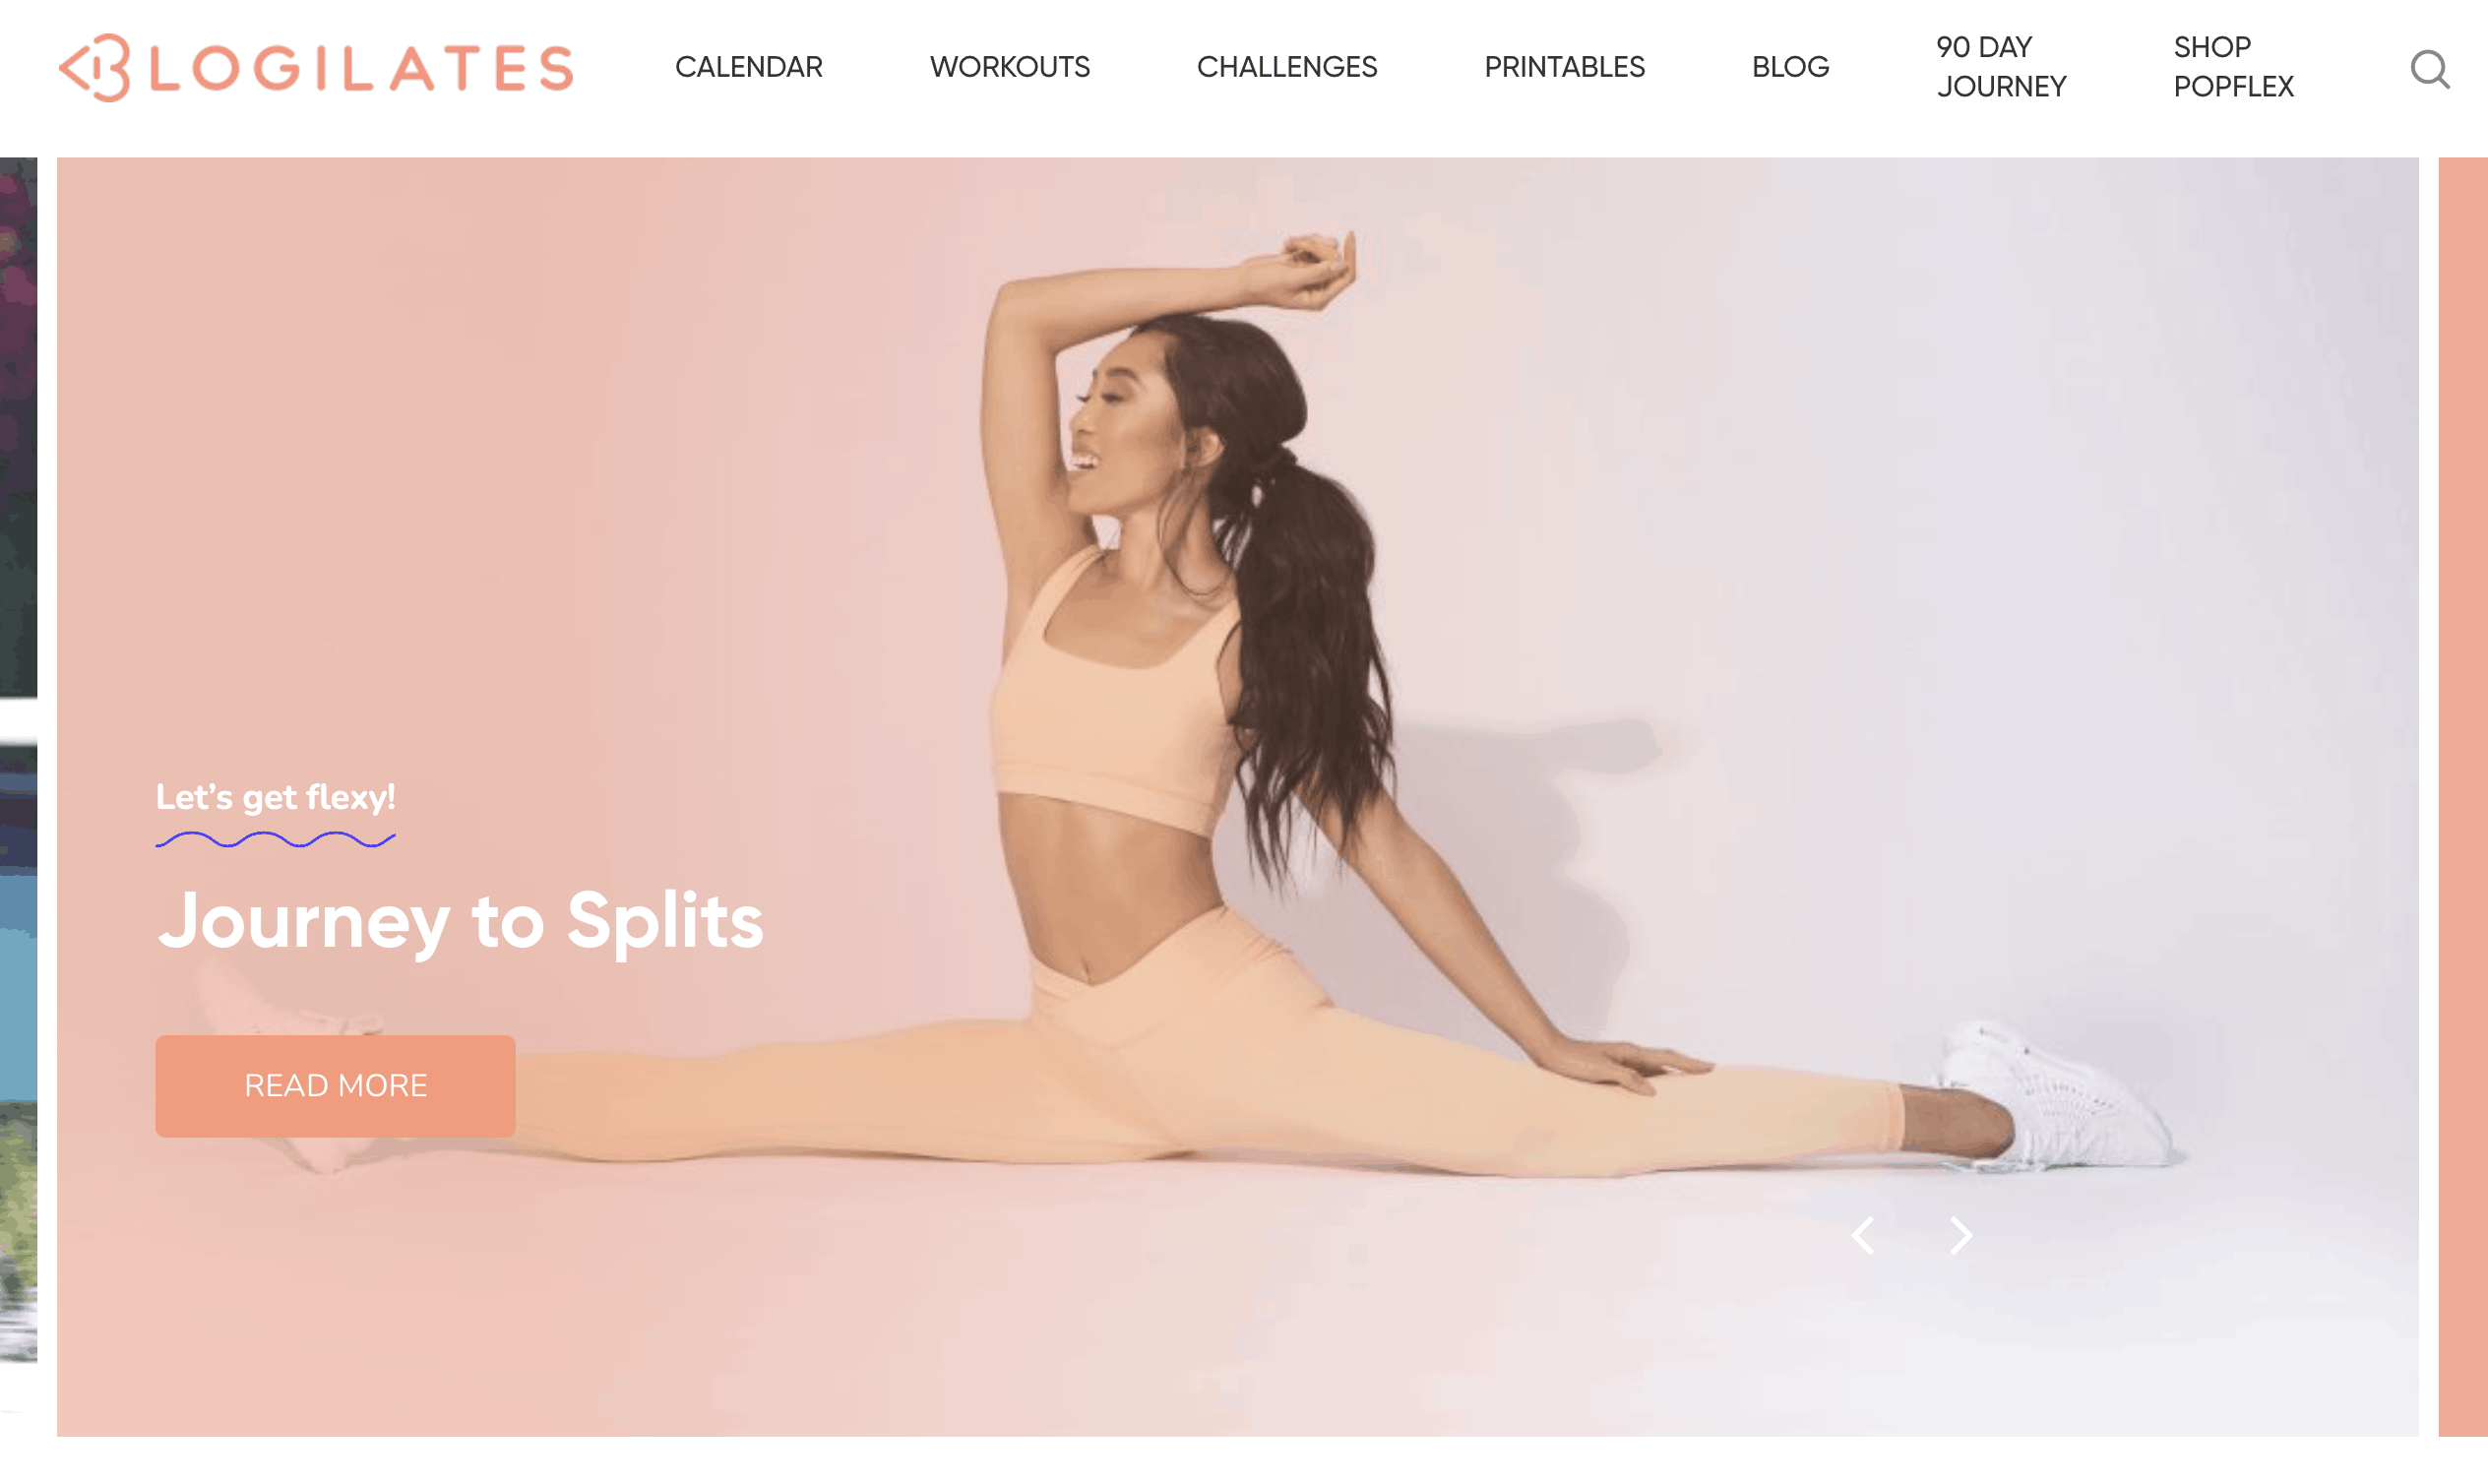 Blogilates is a type of fitness blog that makes money via her own products like courses and planners. 